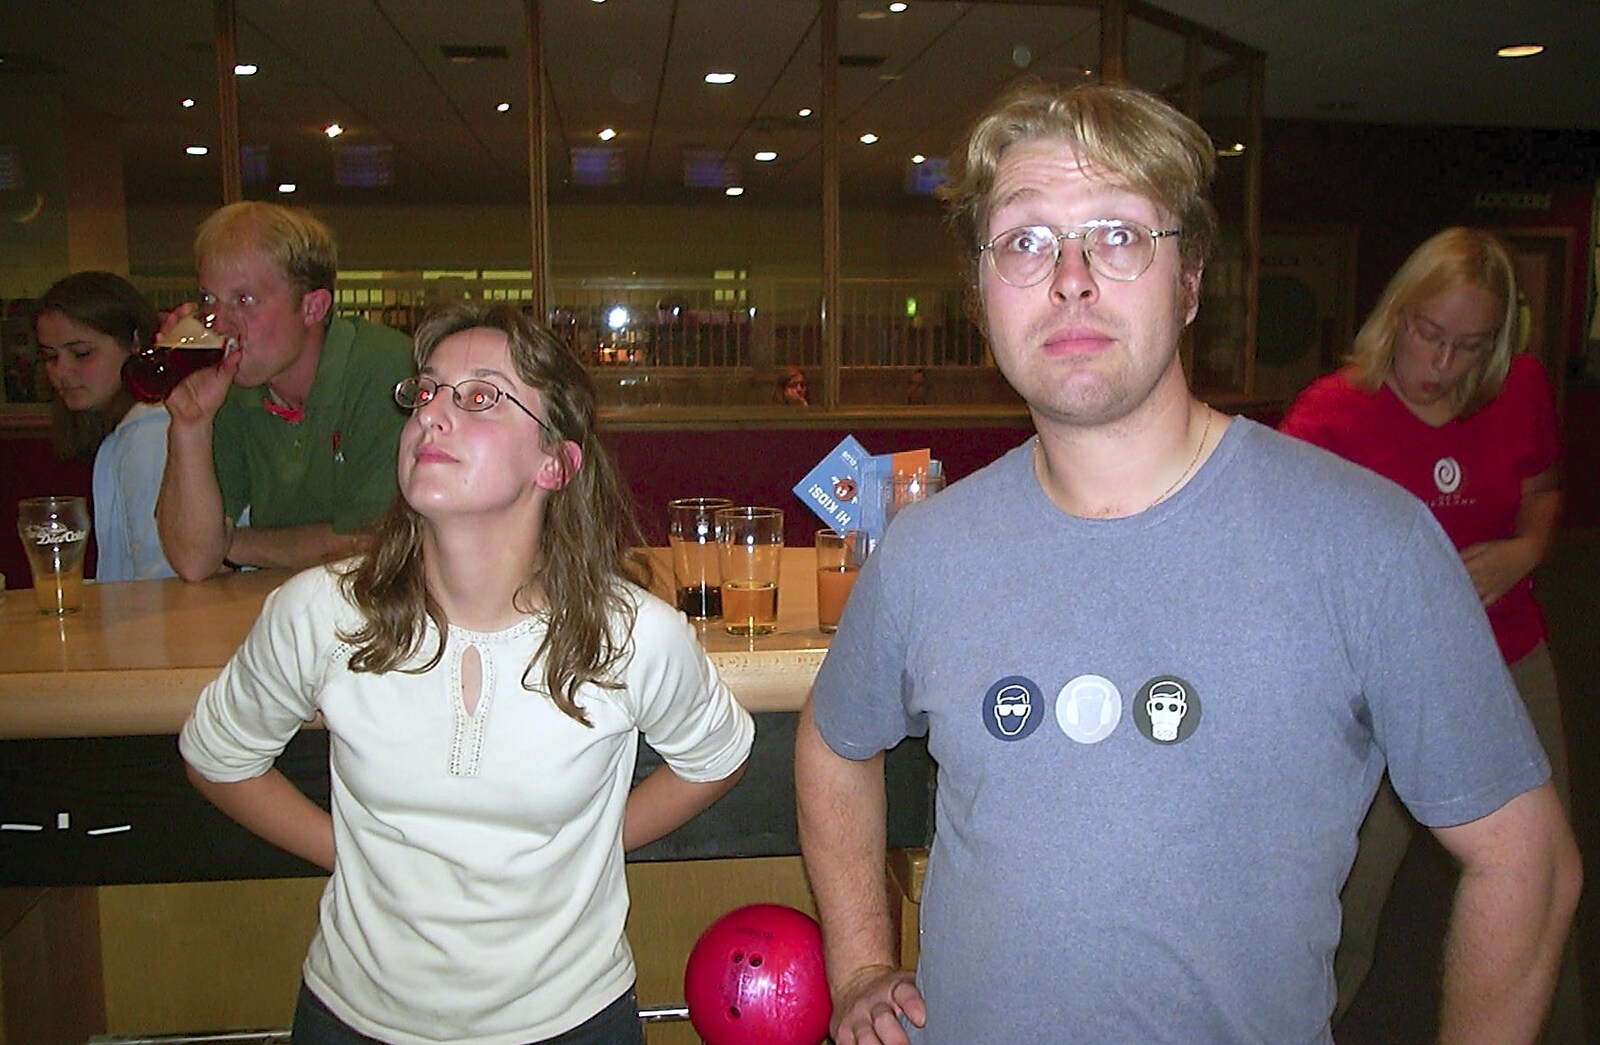 Suey and Marc from Ten Pin Bowling, Norwich, Norfolk - 13th September 2003